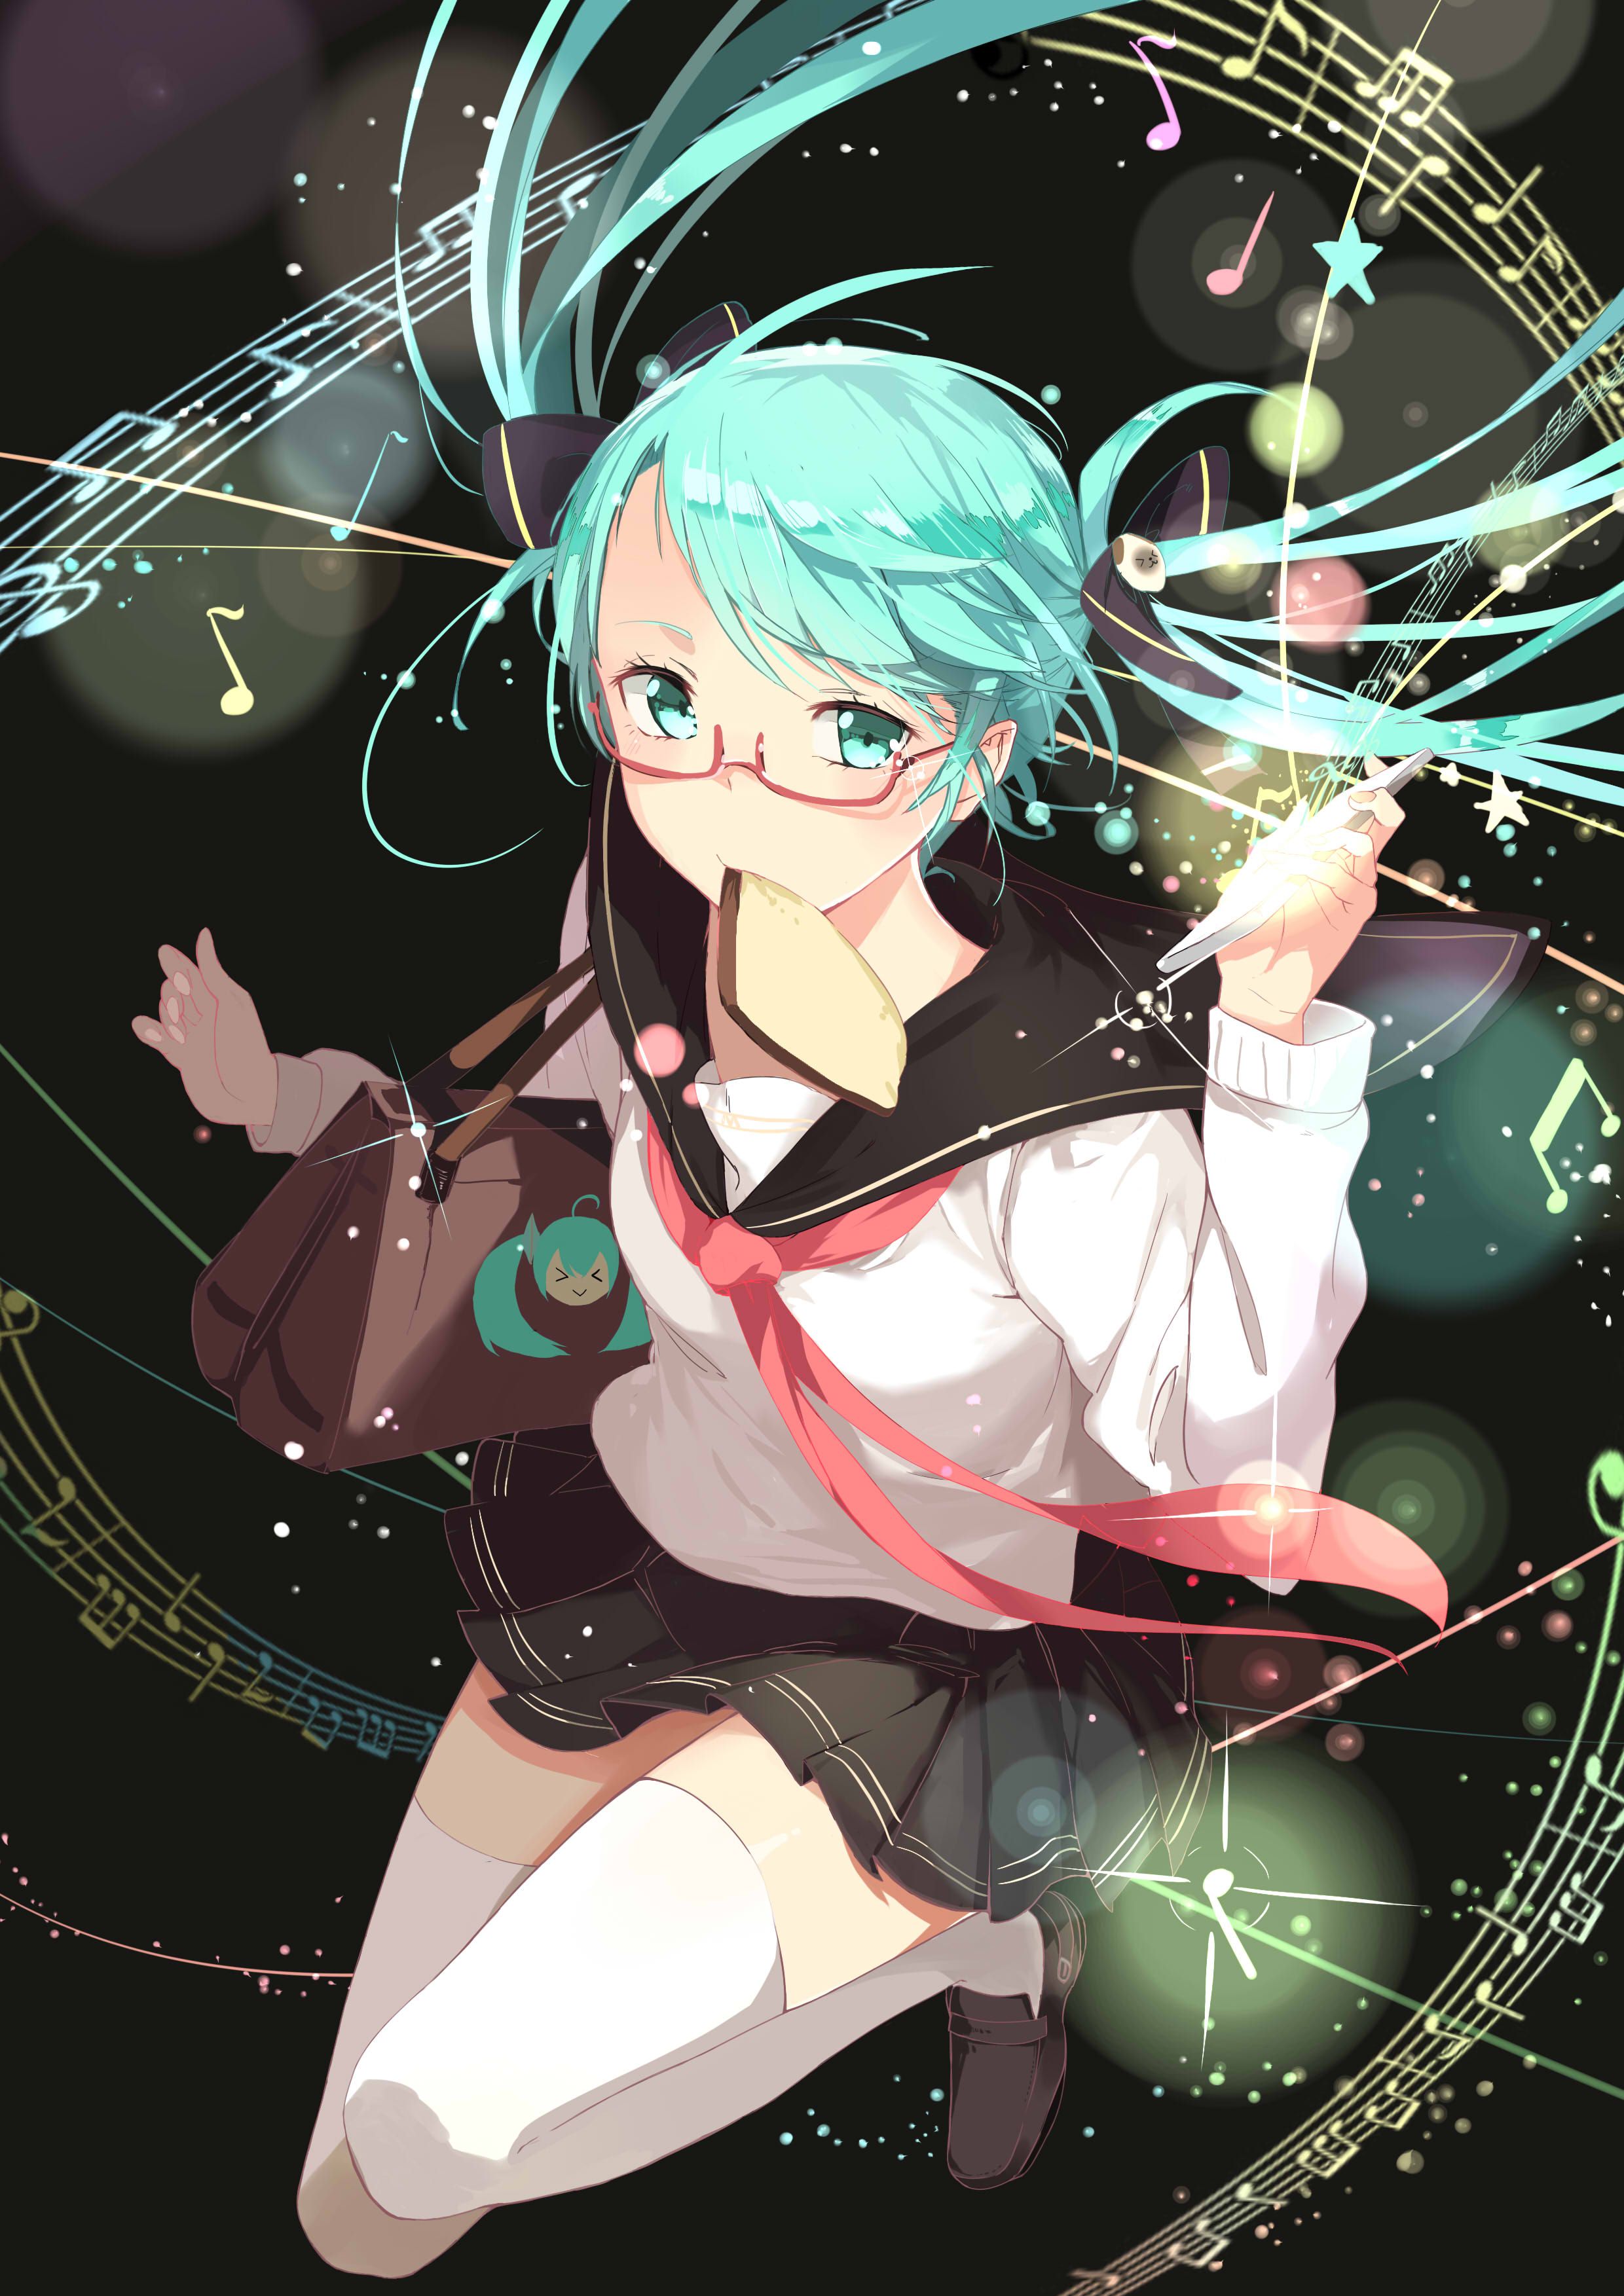 [Secondary] [VOCALOID] want to see images of miku dressed in school uniform! 3 20